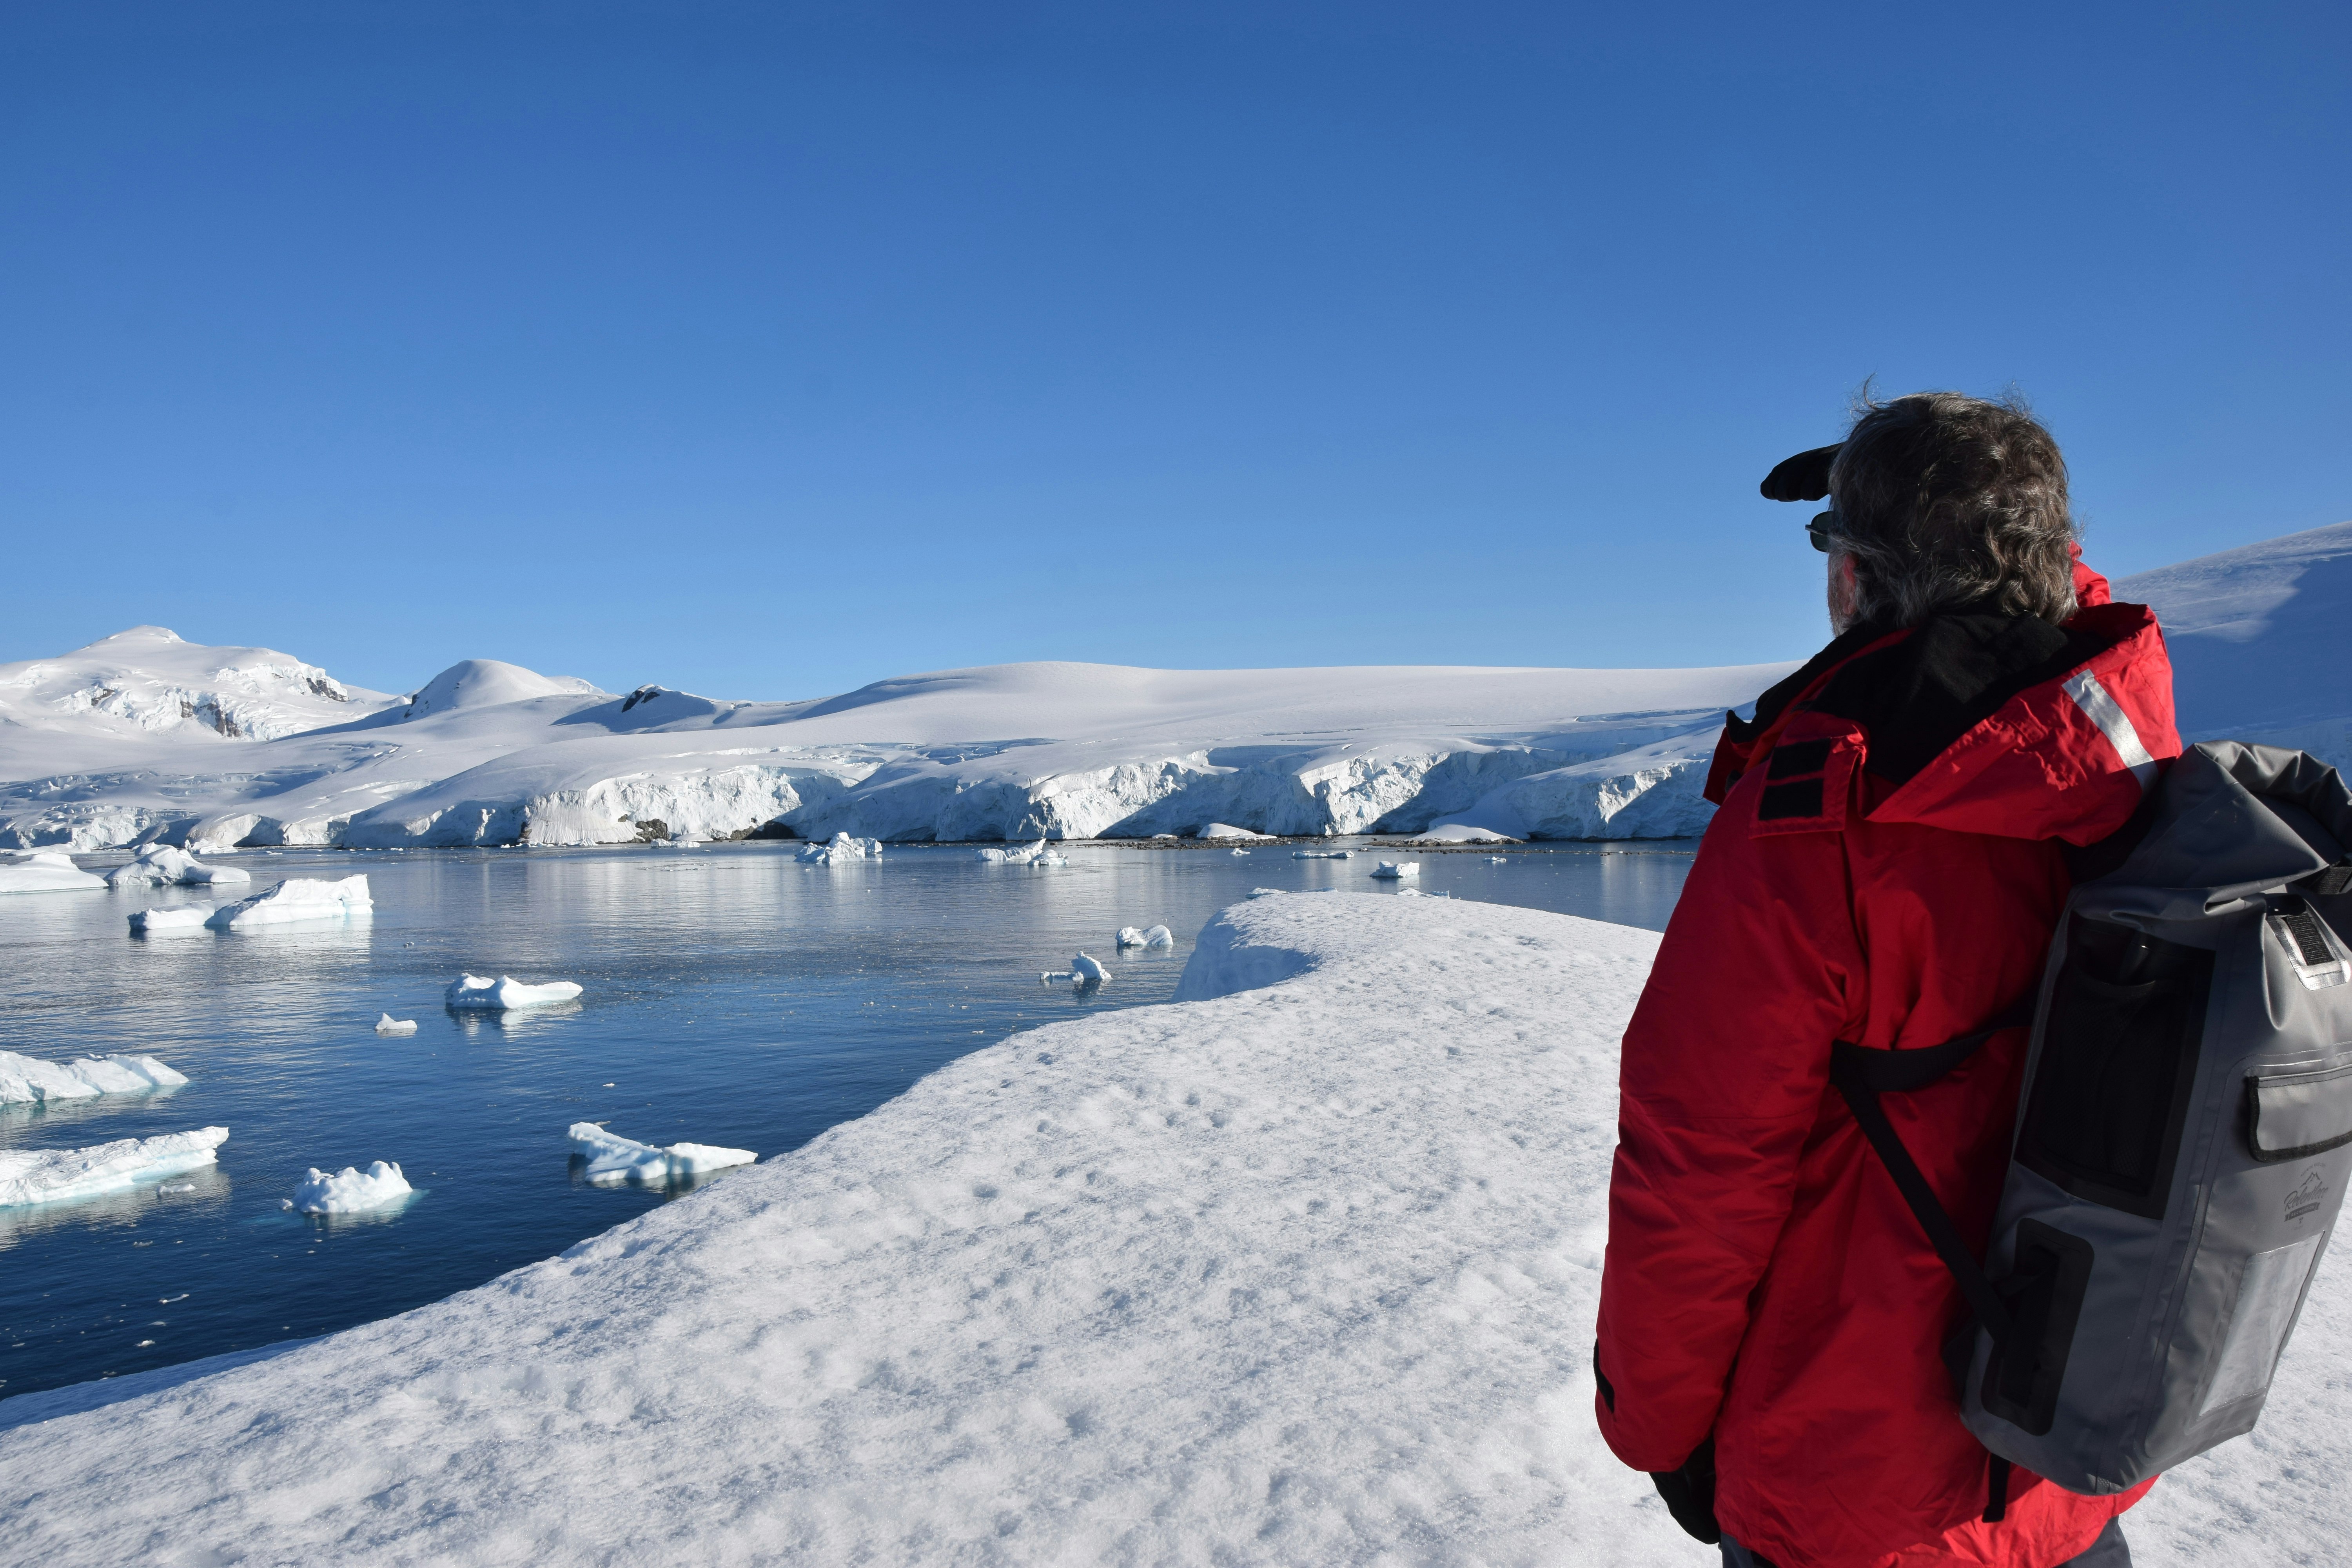 Michael Ballard stands with his back to the camera in a red cruise-line parka and grey dry-bag style backpack gazing out across the snow and ice fields of Antarctica 